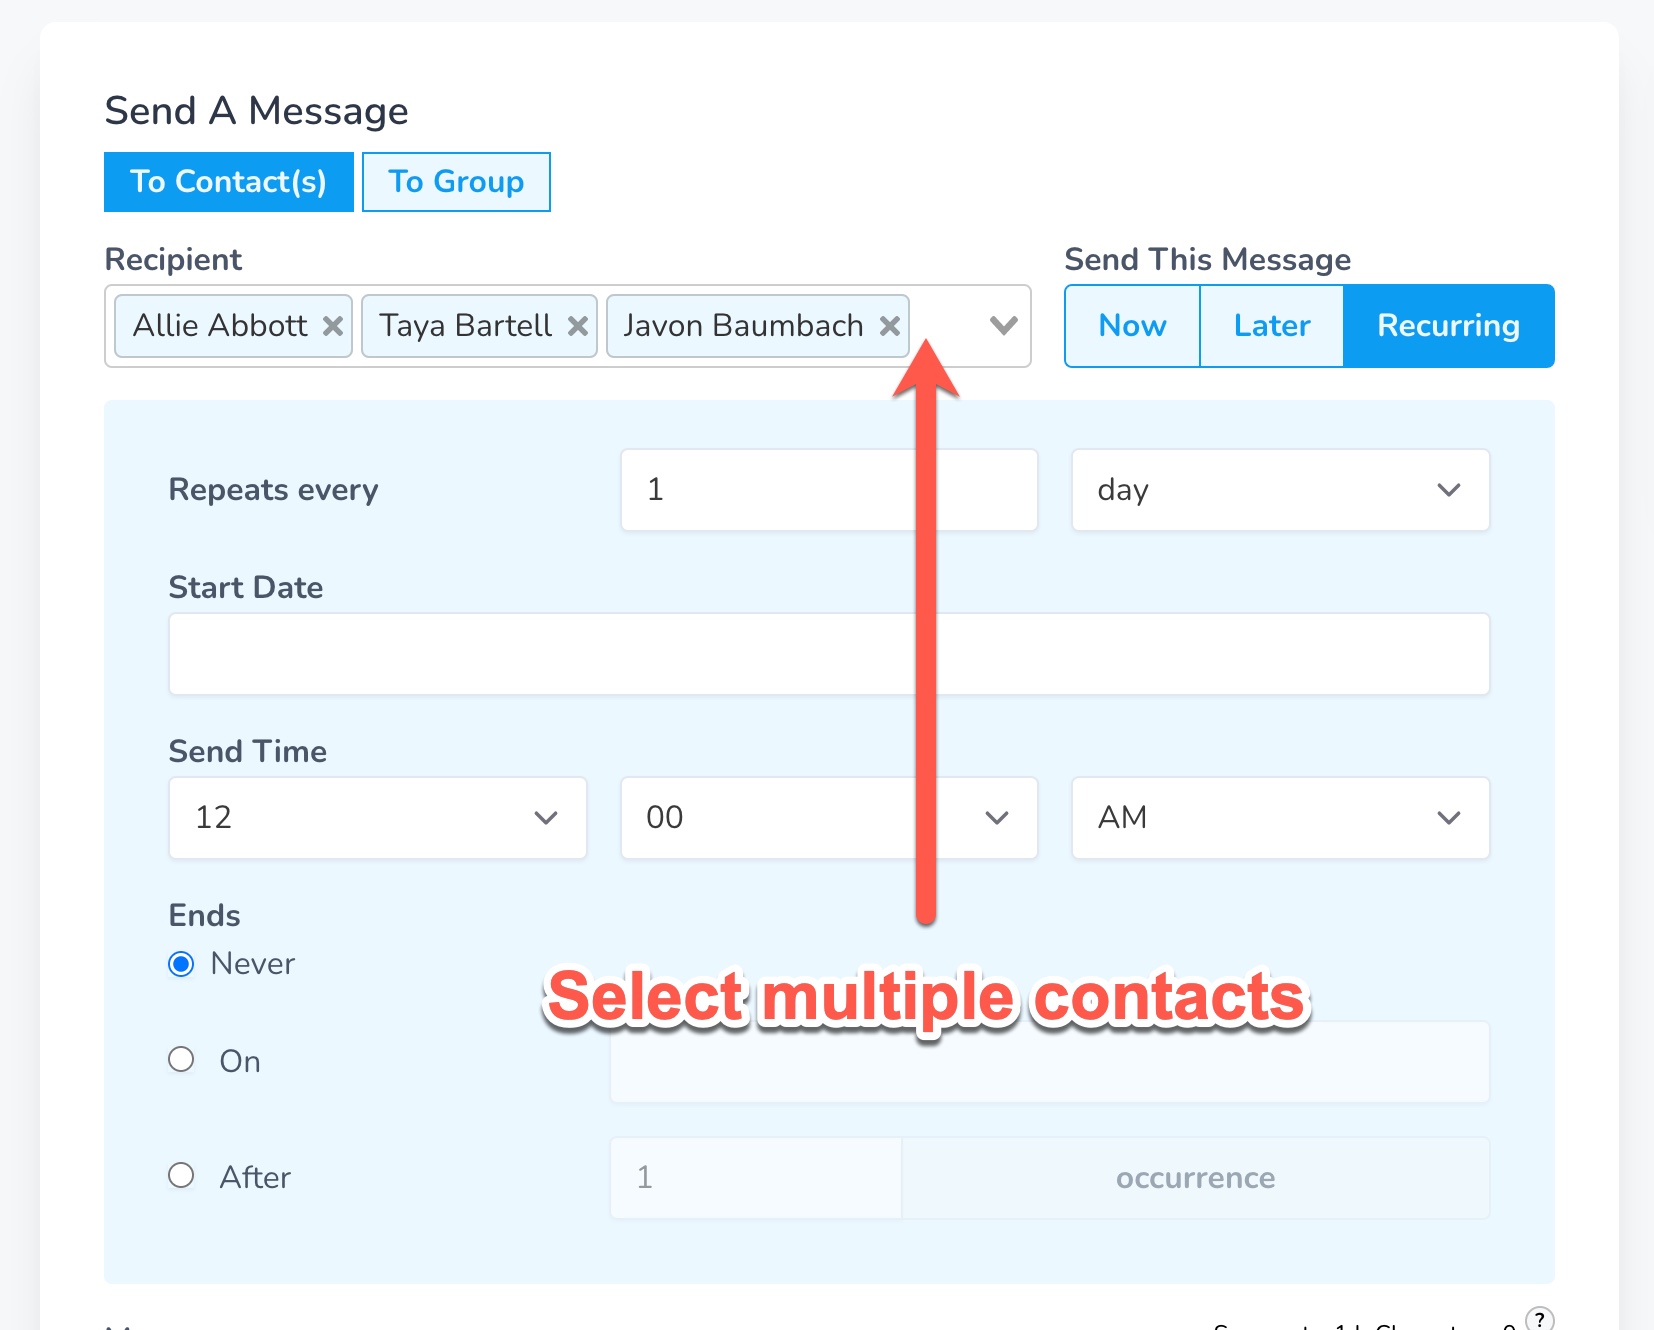 select multiple contacts to send a repeat text to